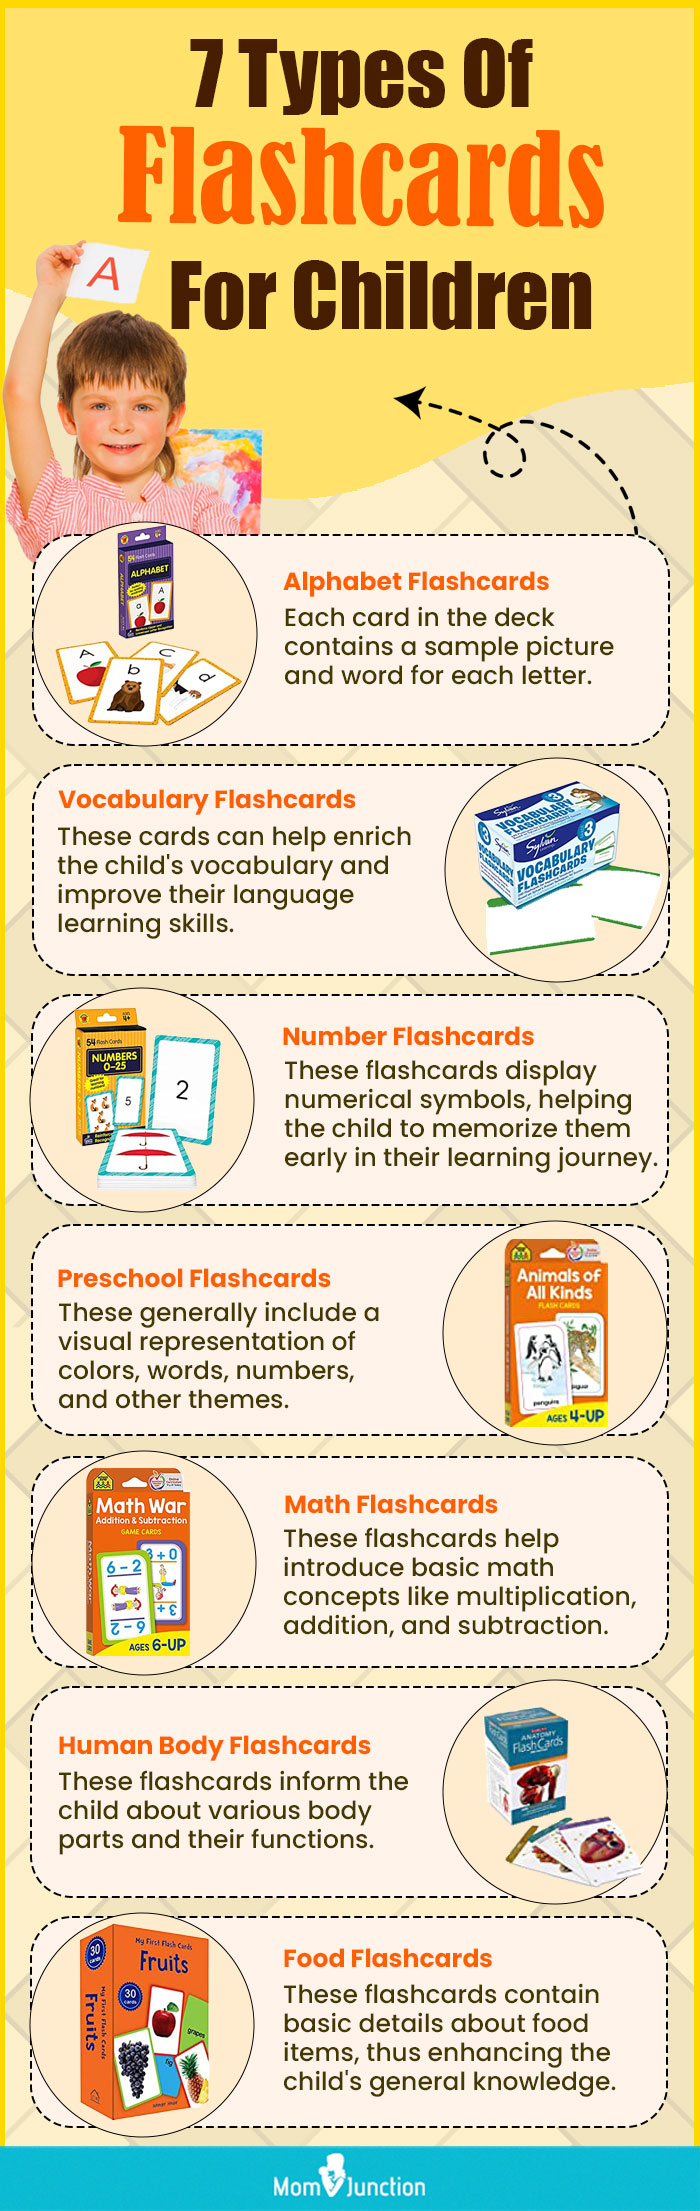 7 Types Of Flashcards For Children (infographic)